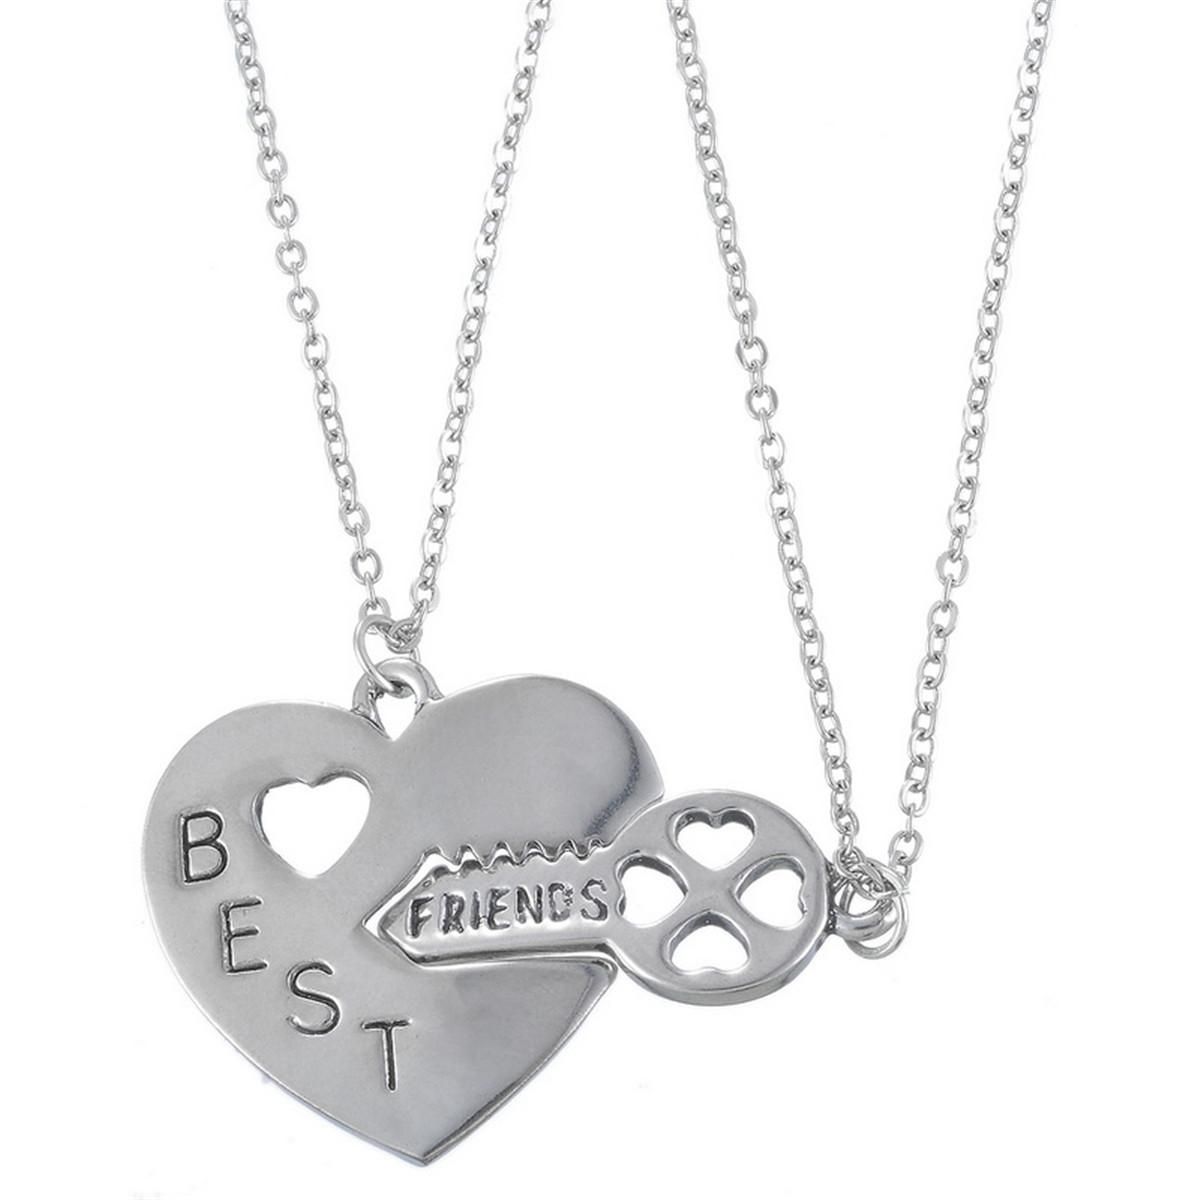 Wholesale Lily Set Of Best Friends Heart Lock Key Pendant Necklaces Within Most Recent Best Friends Heart & Key Necklaces Pendant Necklaces (View 22 of 25)